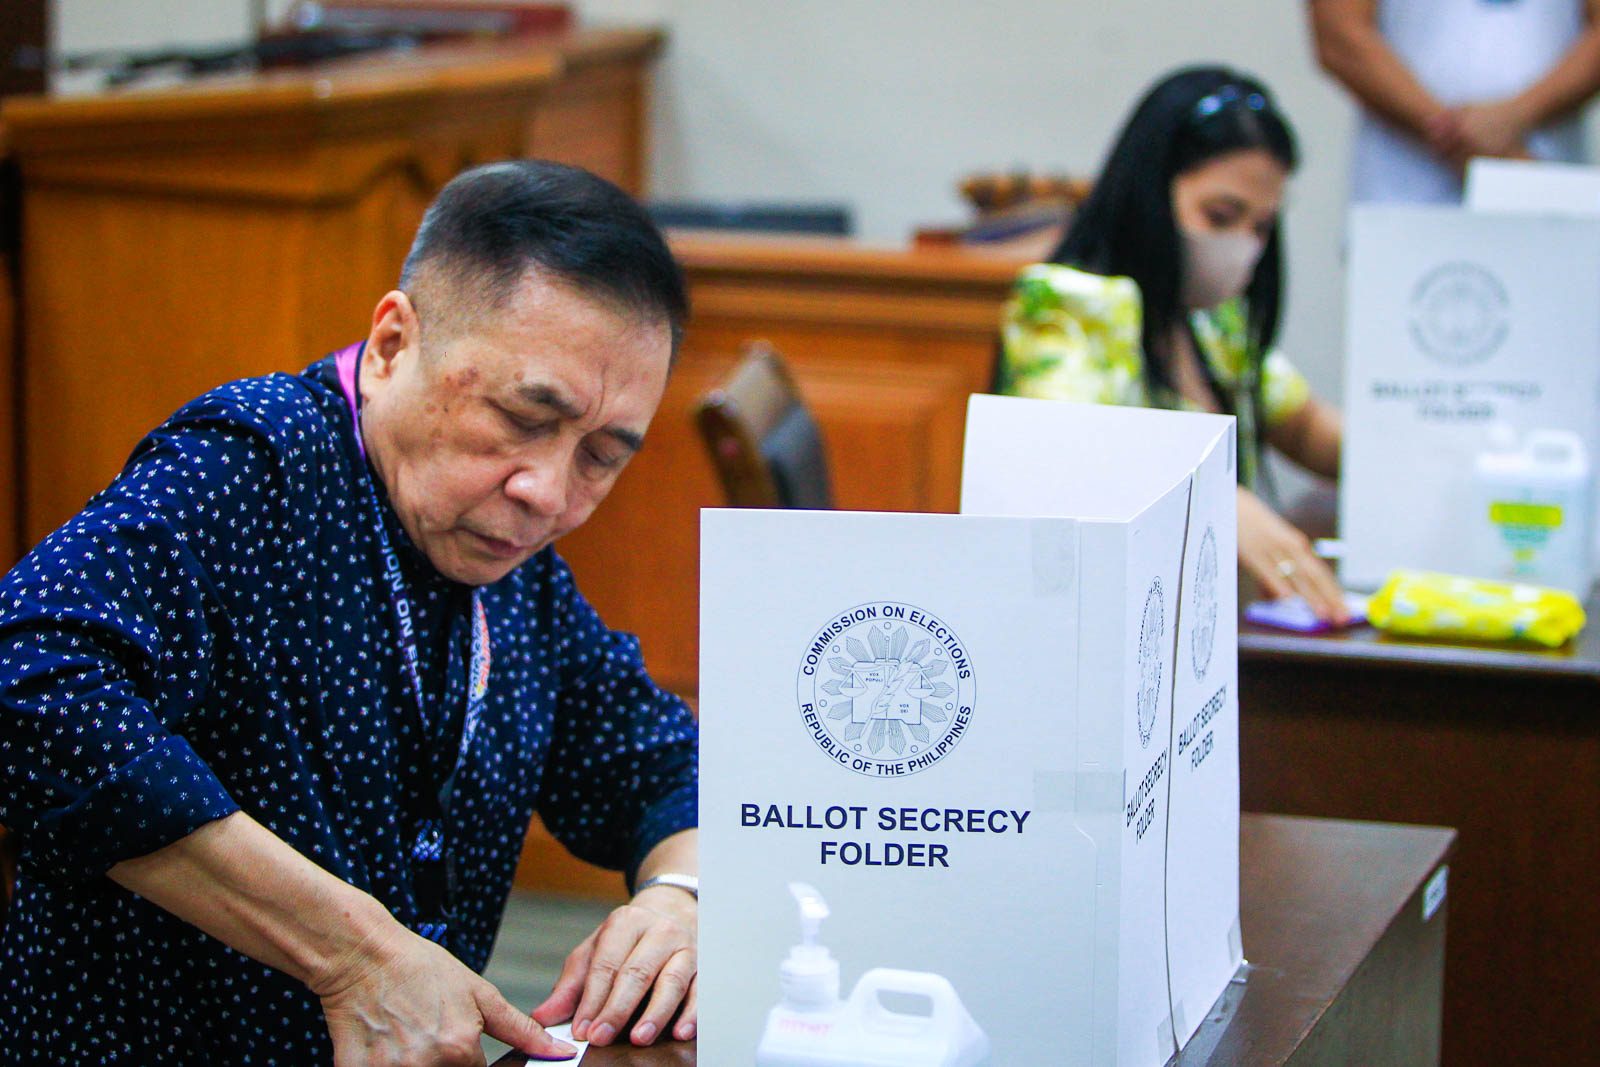 3-day local absentee voting begins for gov’t employees, security forces, media